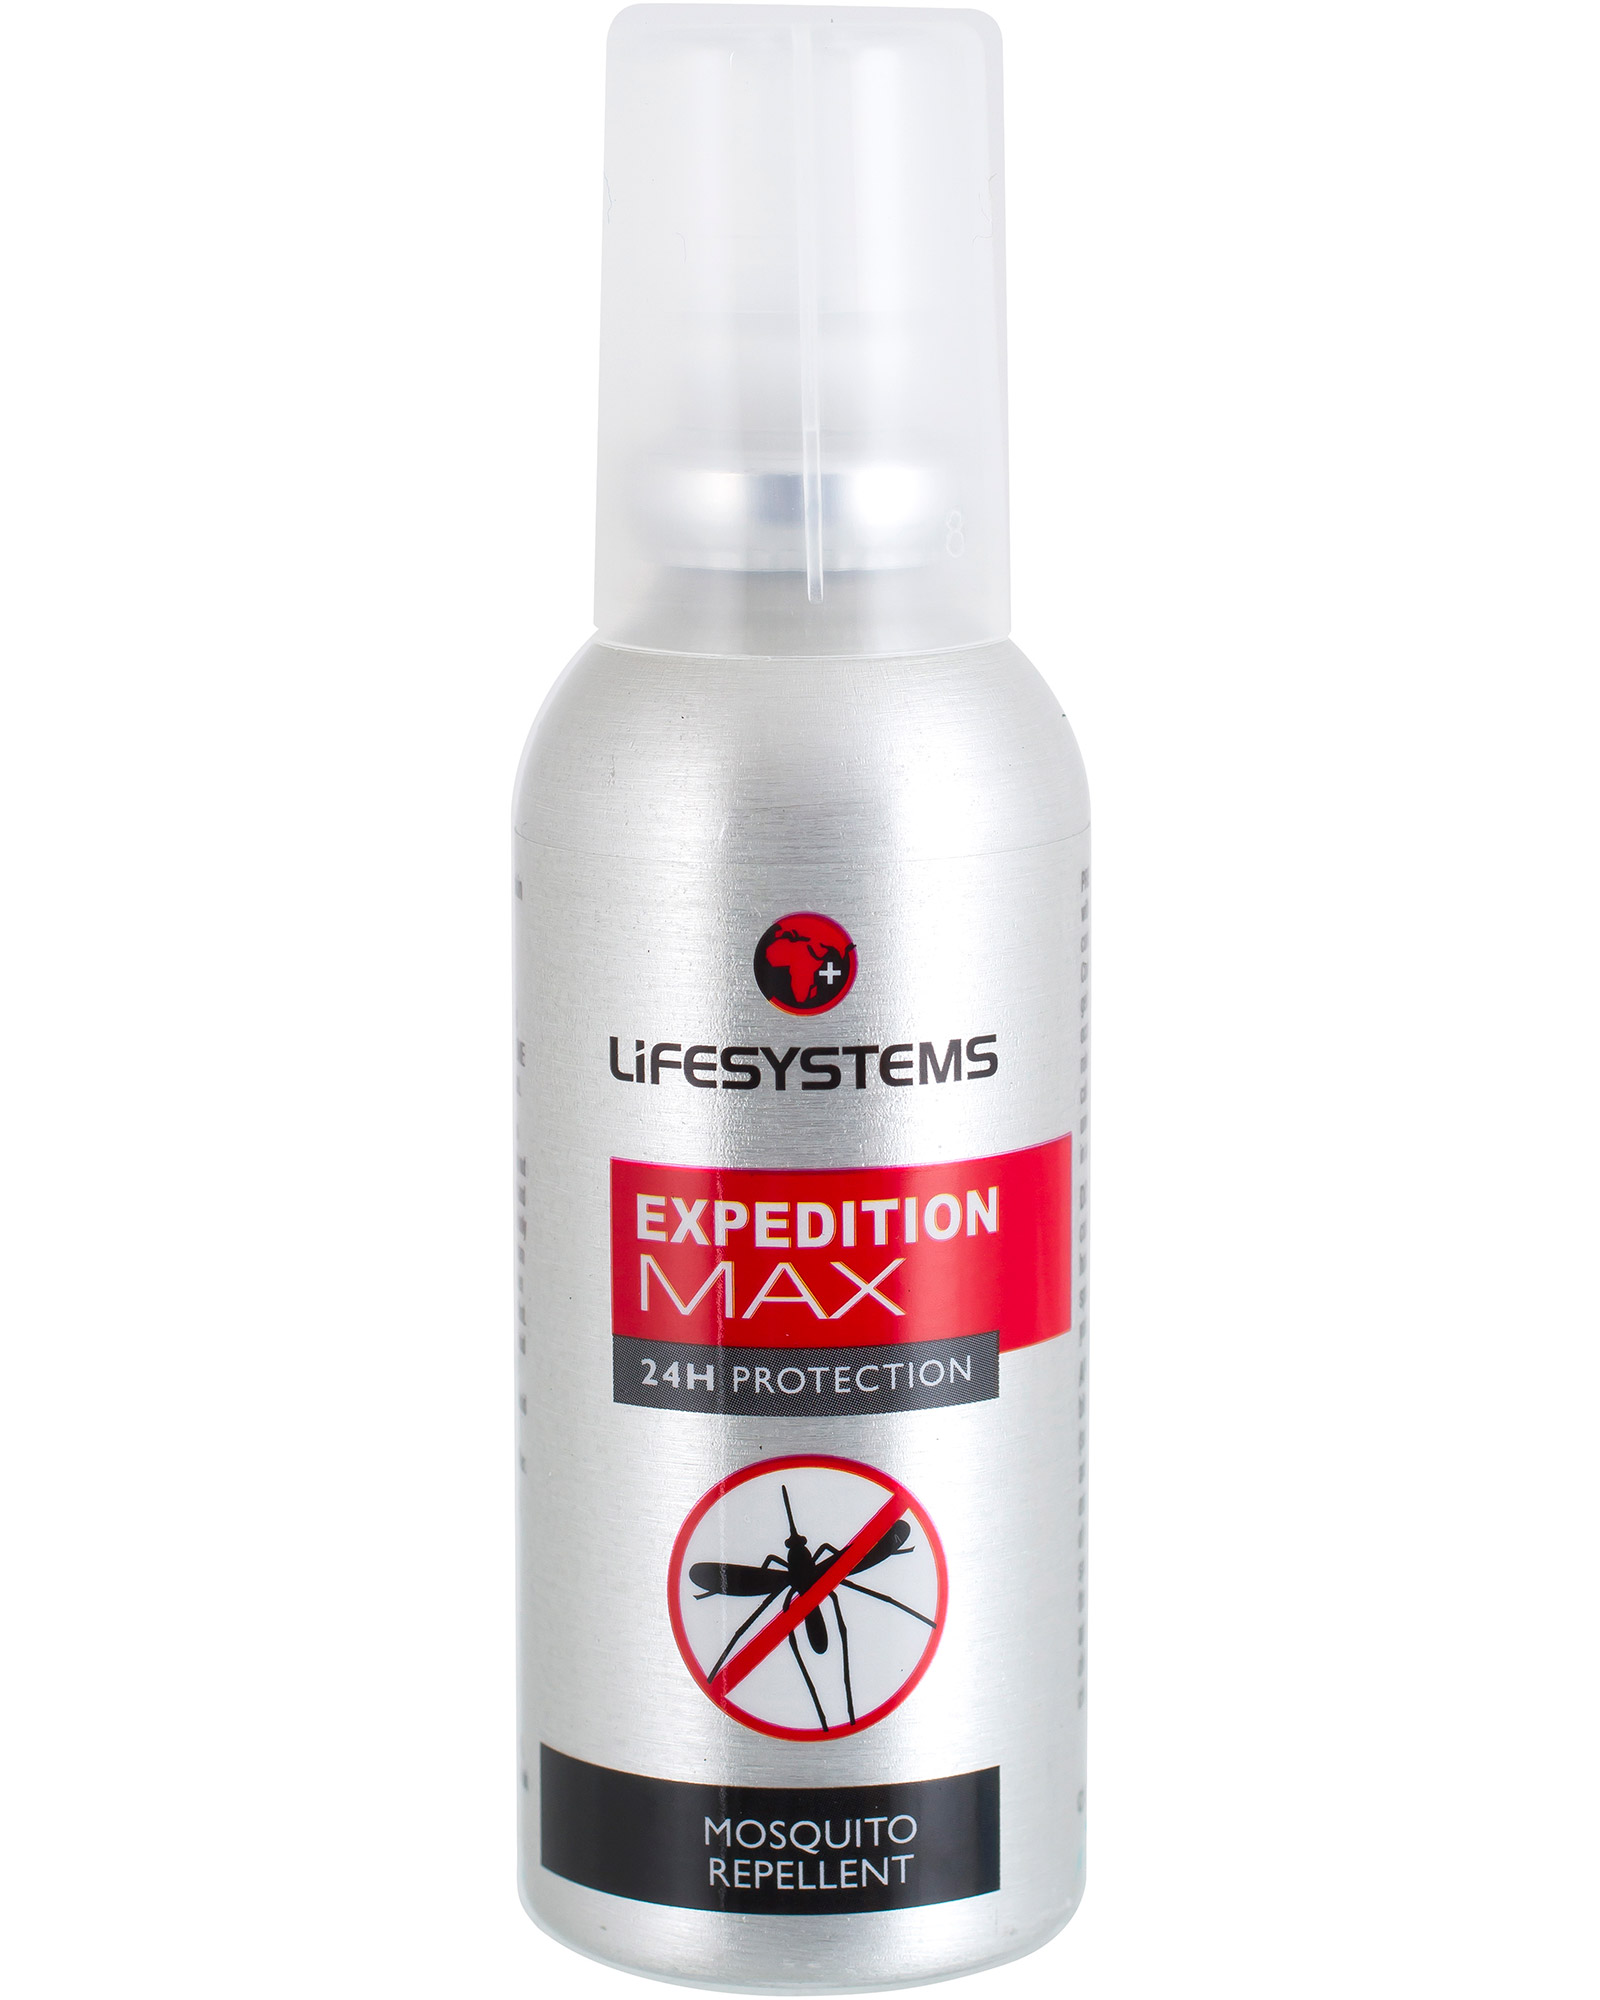 Lifesystems Expedition Max 50ml Insect Repellent